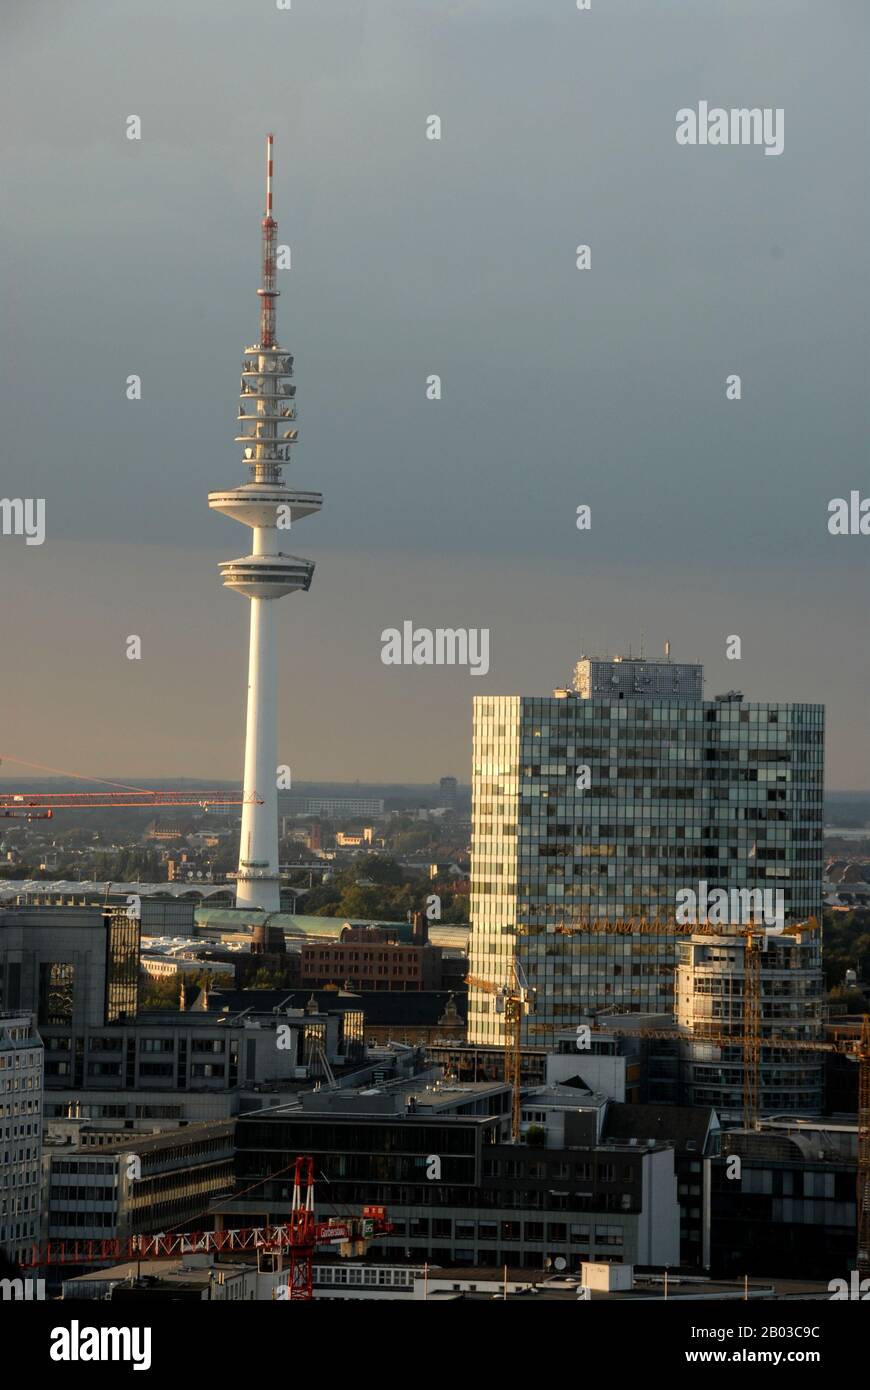 The Heinrich Hertz Tower (Heinrich-Hertz-Turm) is a radio telecommunication tower, and is Hamburg's tallest structure at 279.2 m (916 ft). It was cons Stock Photo